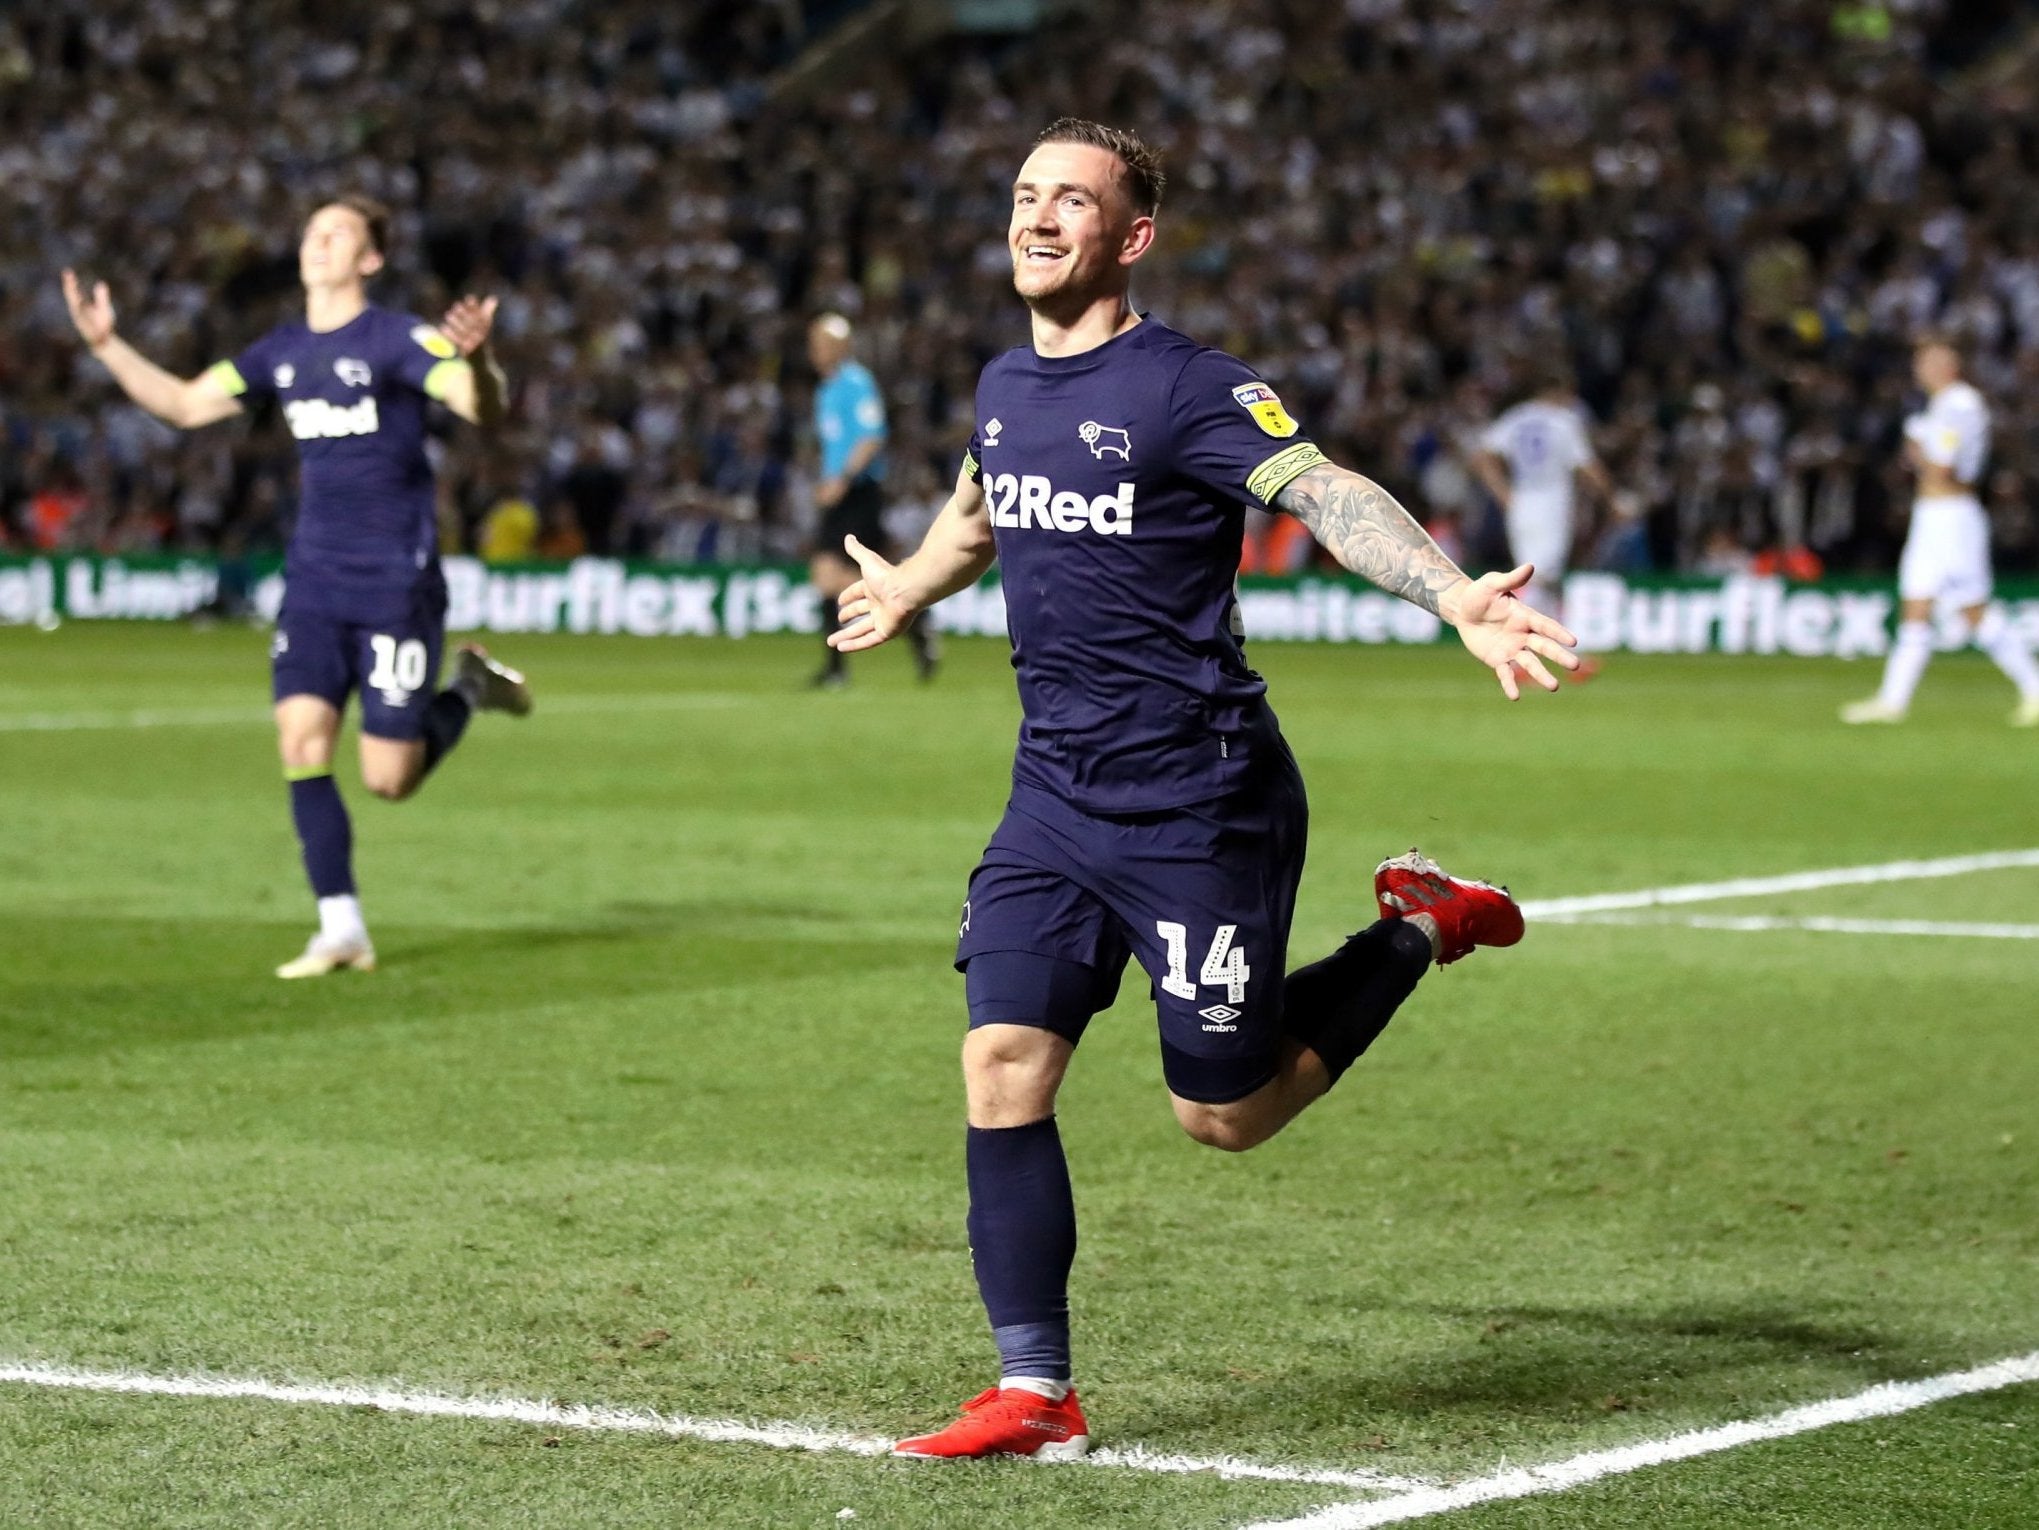 Jack Marriott scored 33 seconds after coming on for Derby in the first half